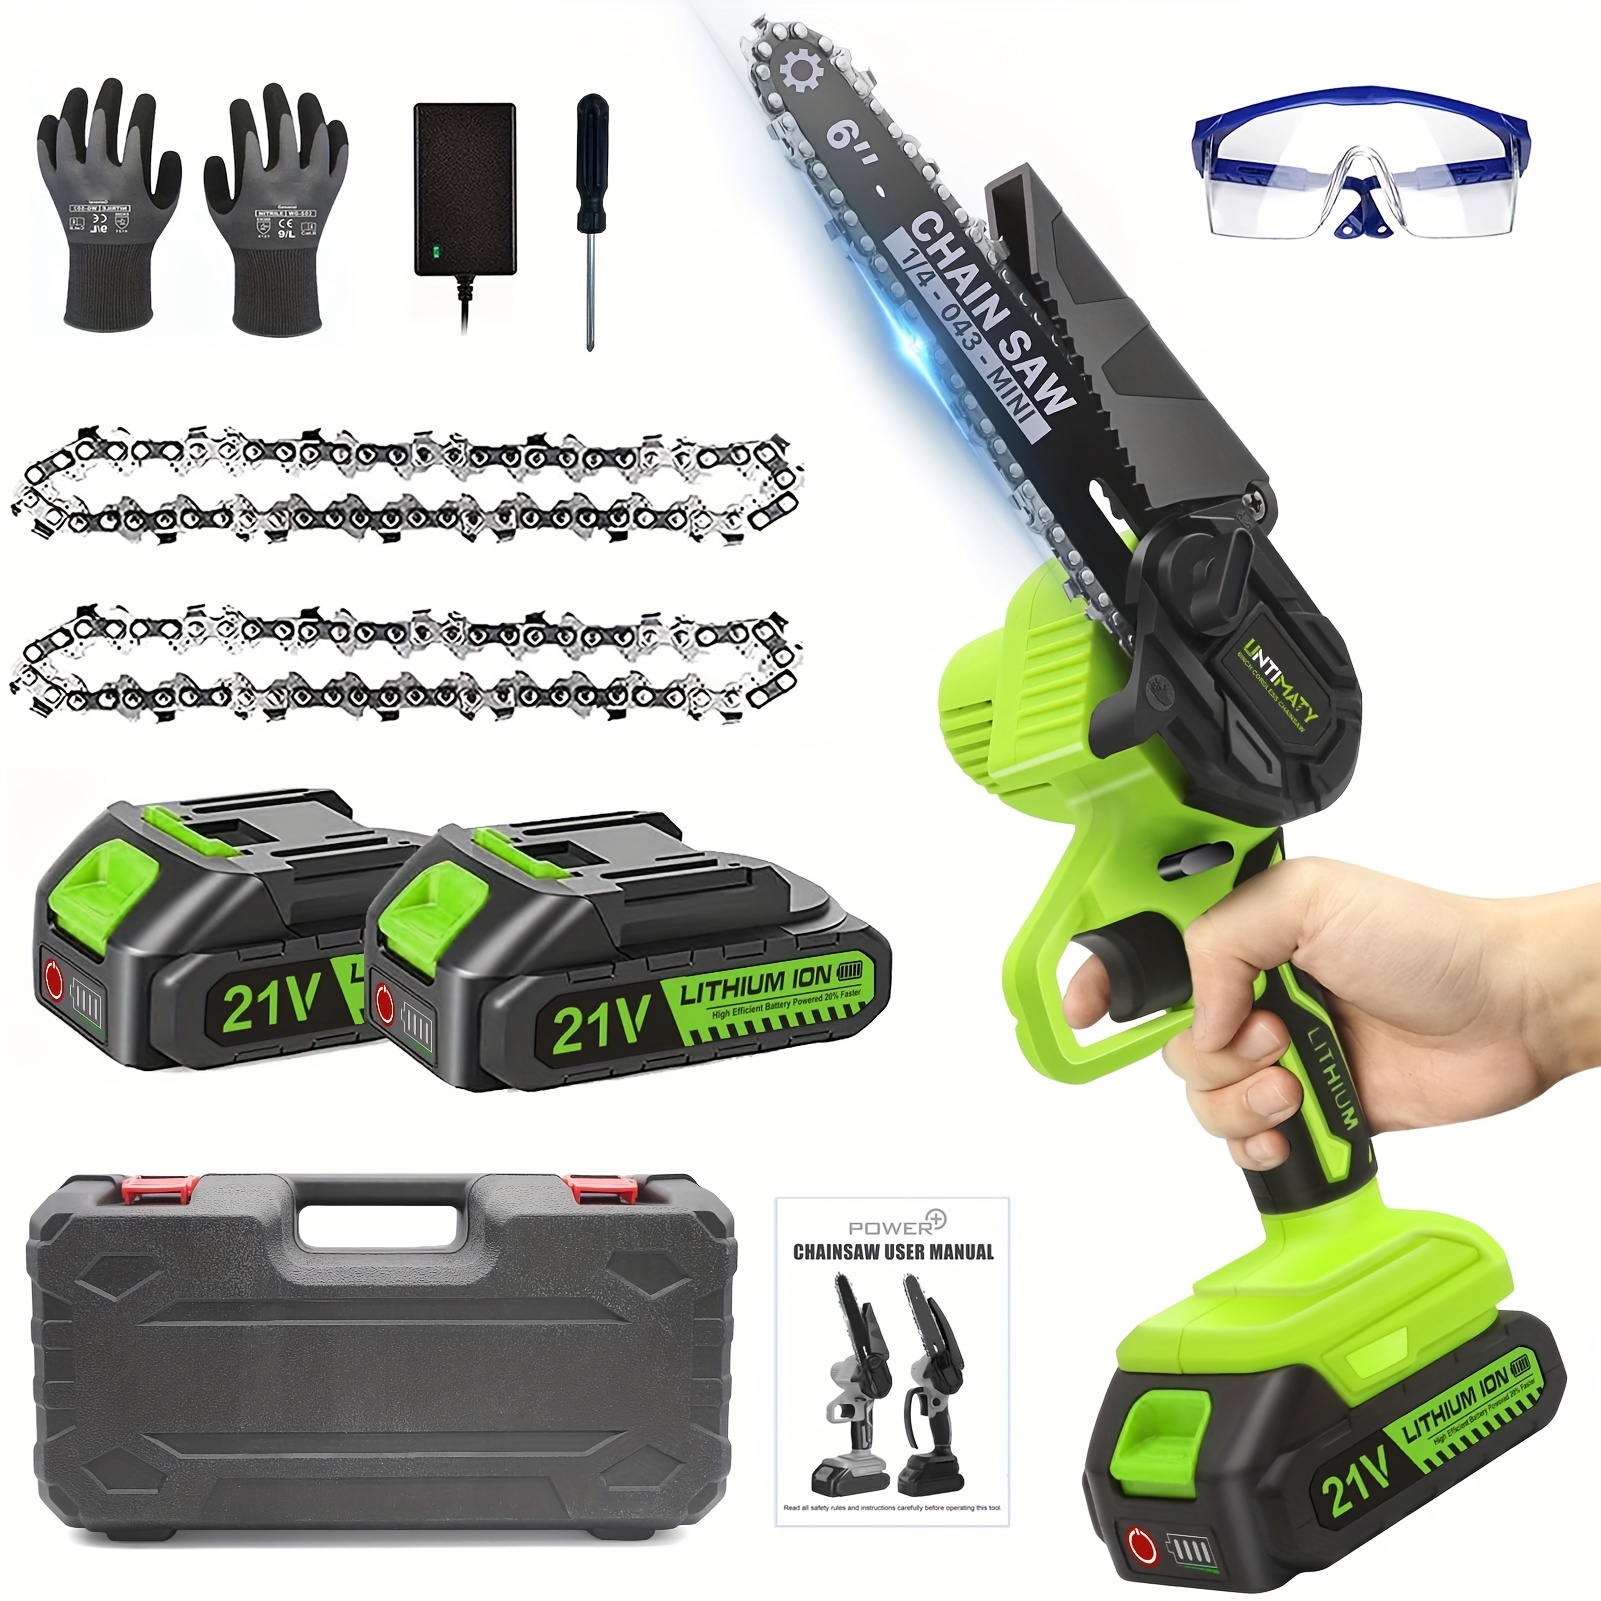 New Mini chainsaw Electric Wood Cutter Cordless Chain Saw with battery & 2  Chain 